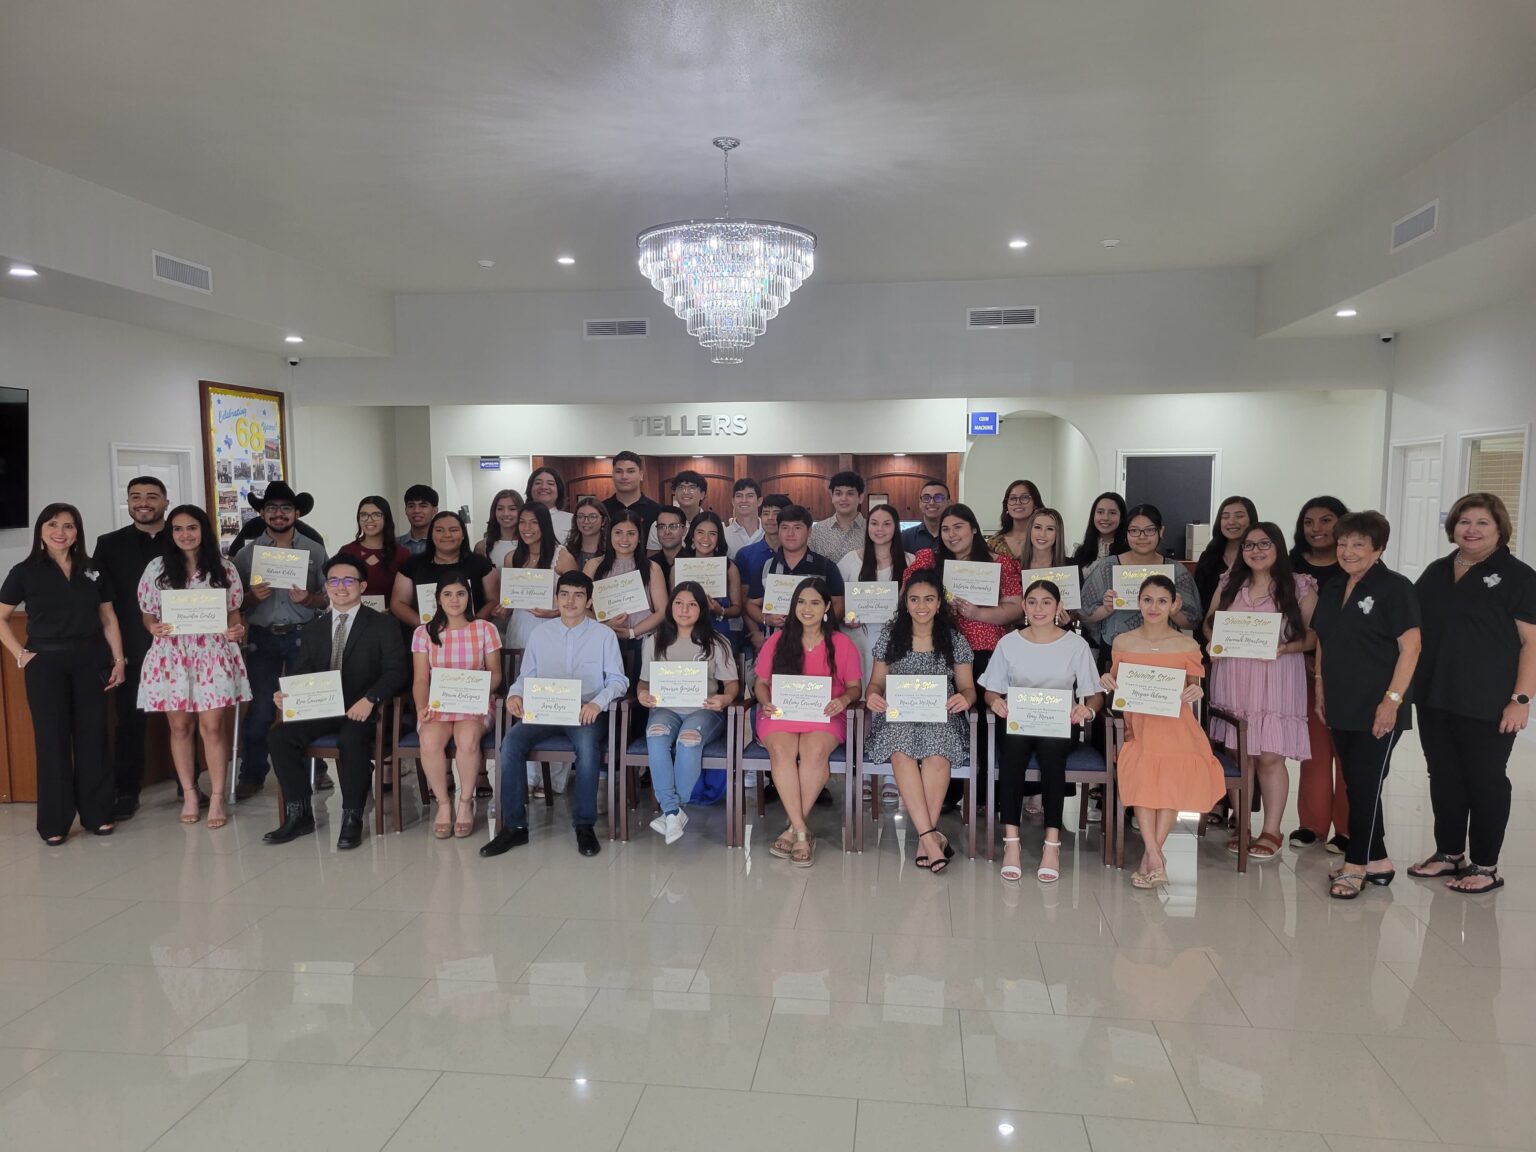 COMMUNITY - Border Federal Credit Union awards 50 scholarships - 830Times